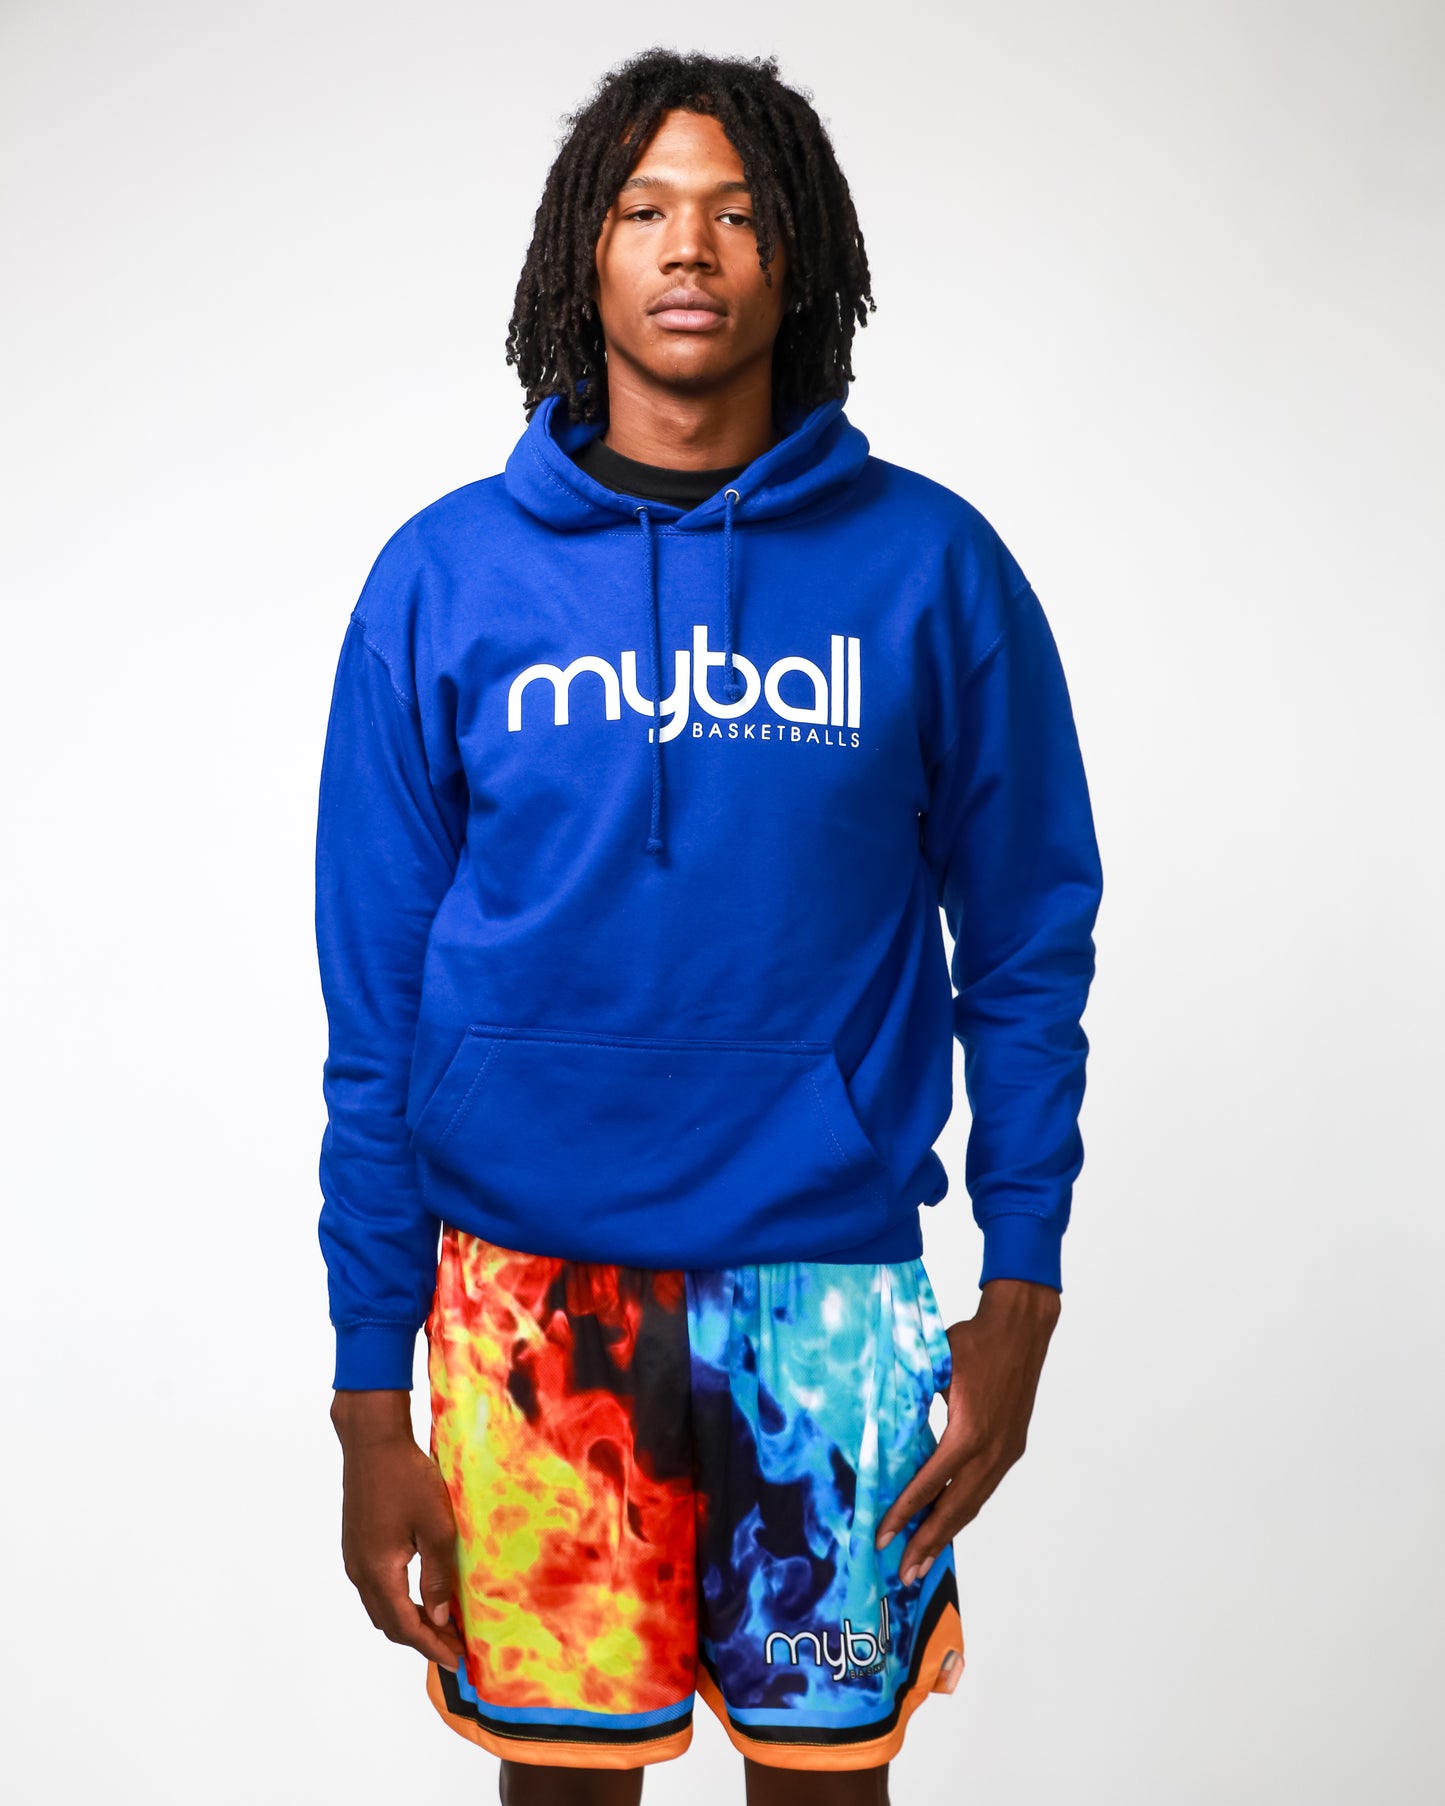 MB Fire & Ice shorts